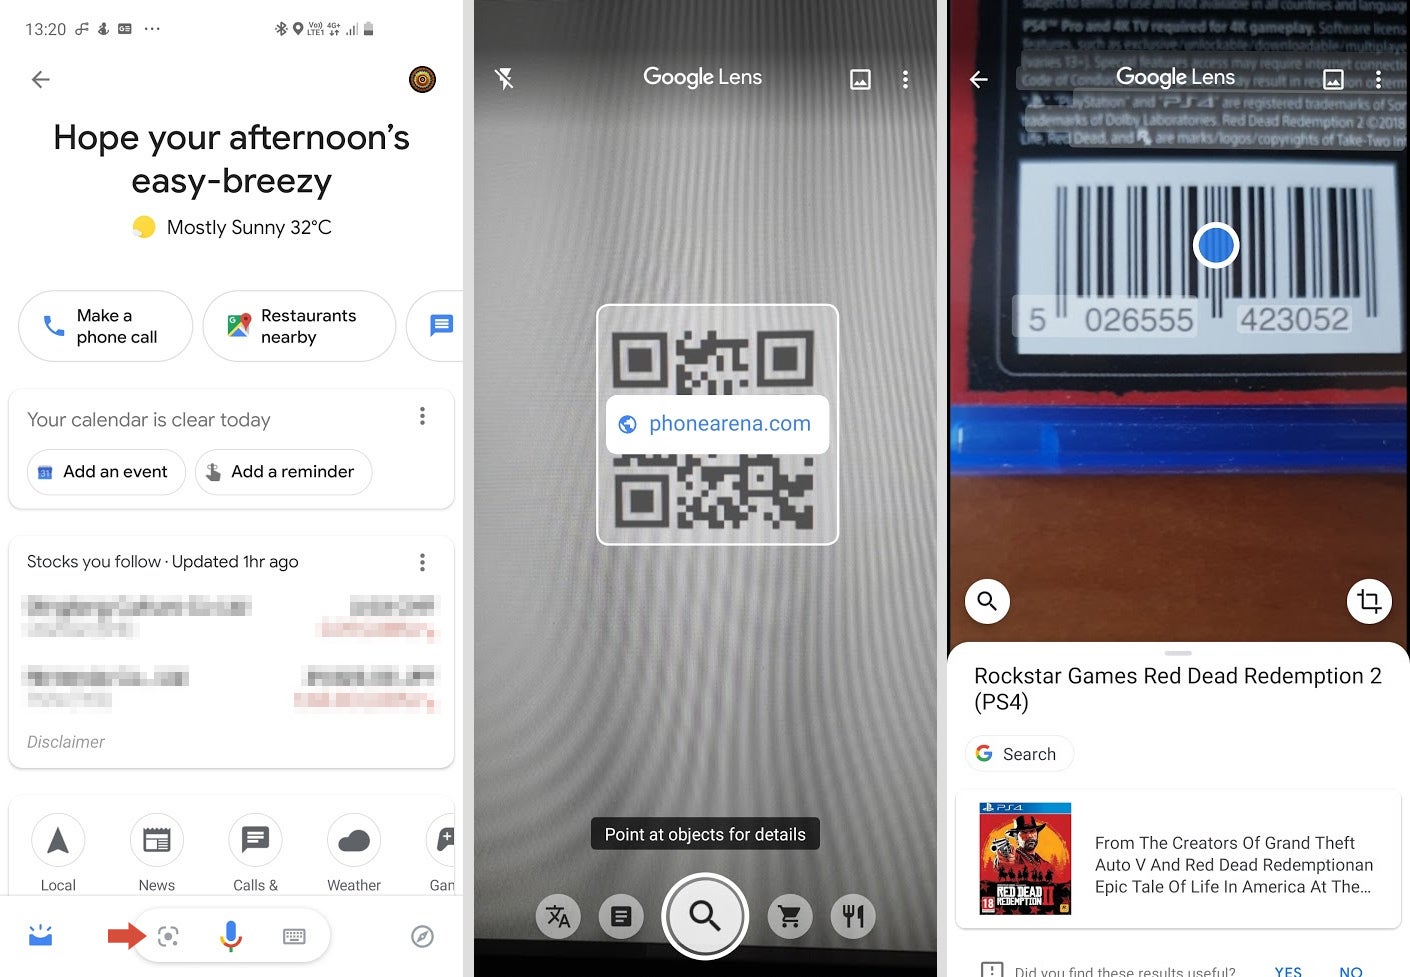 Scanning QR codes and barcodes using Google Lens - How to scan QR codes and barcodes on iPhone and Android